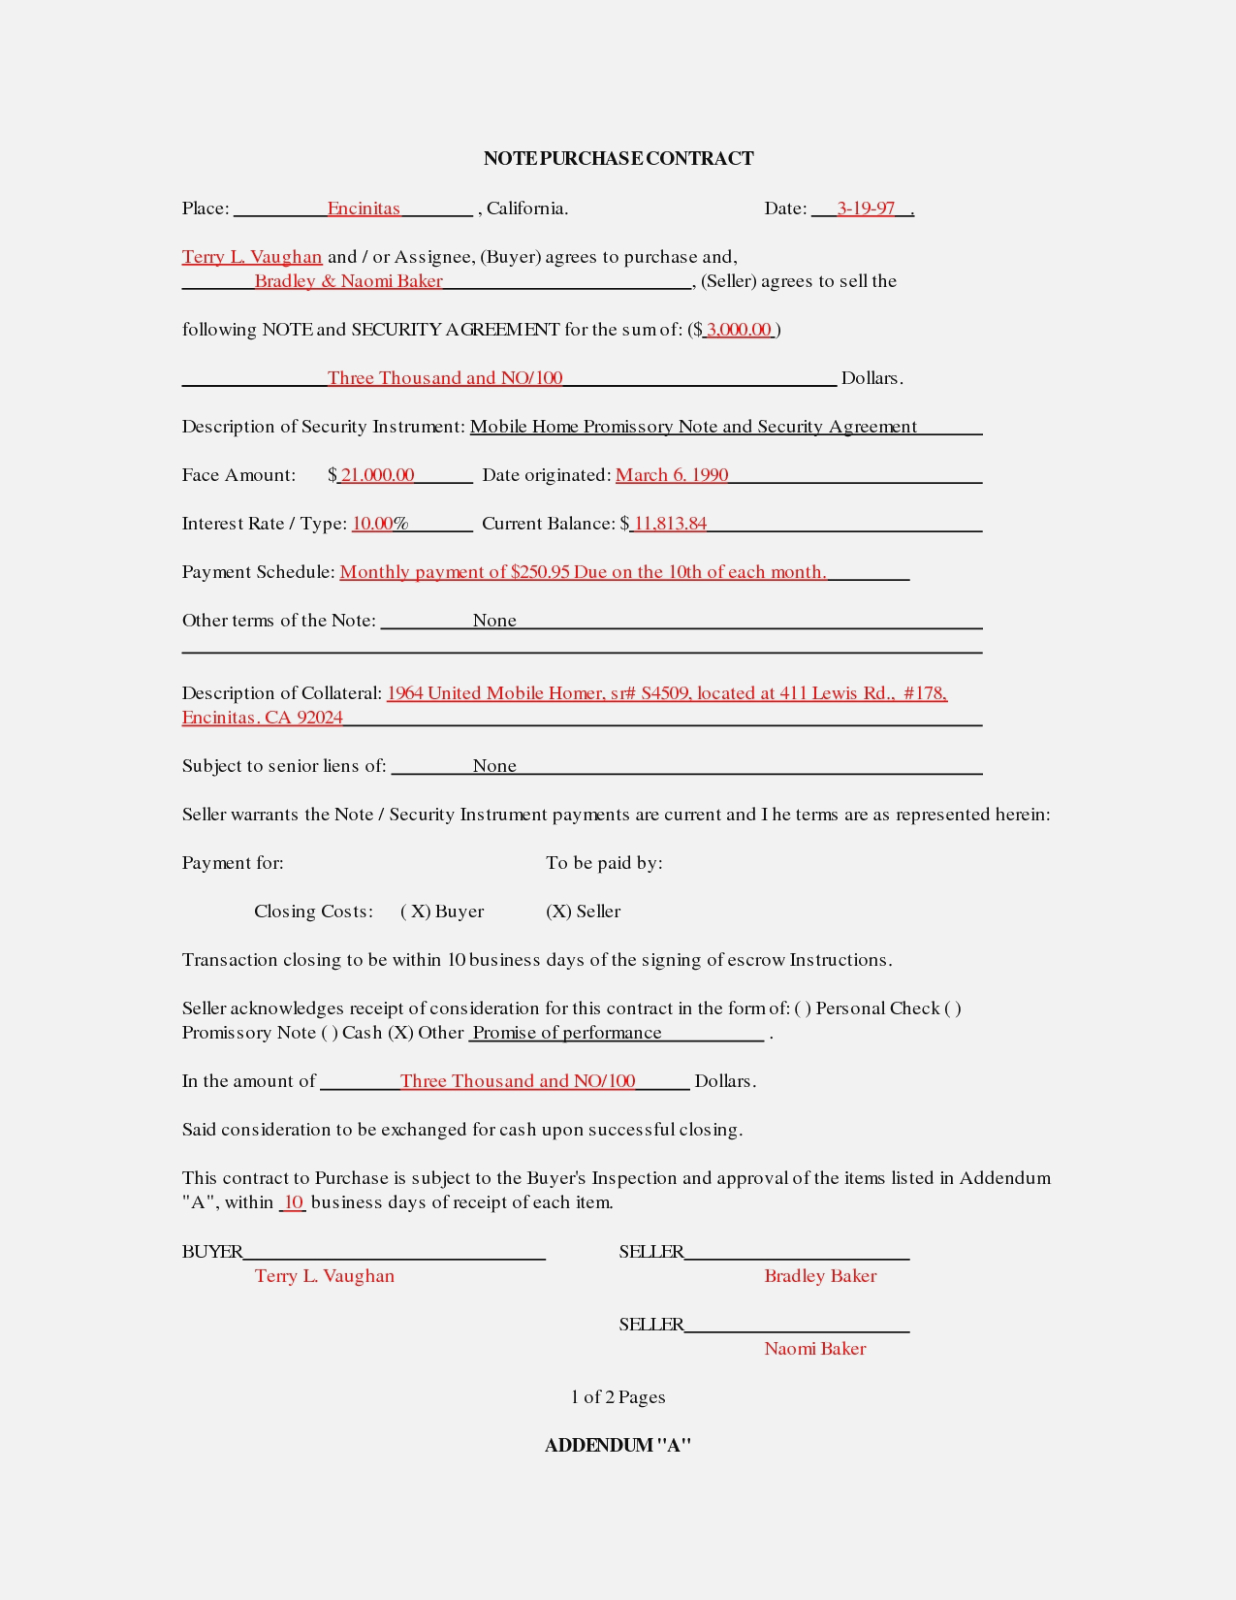 Minnesota Purchase Agreement 10 Excellent Mobile Home Purchase Agreement J10 Rq Tricities